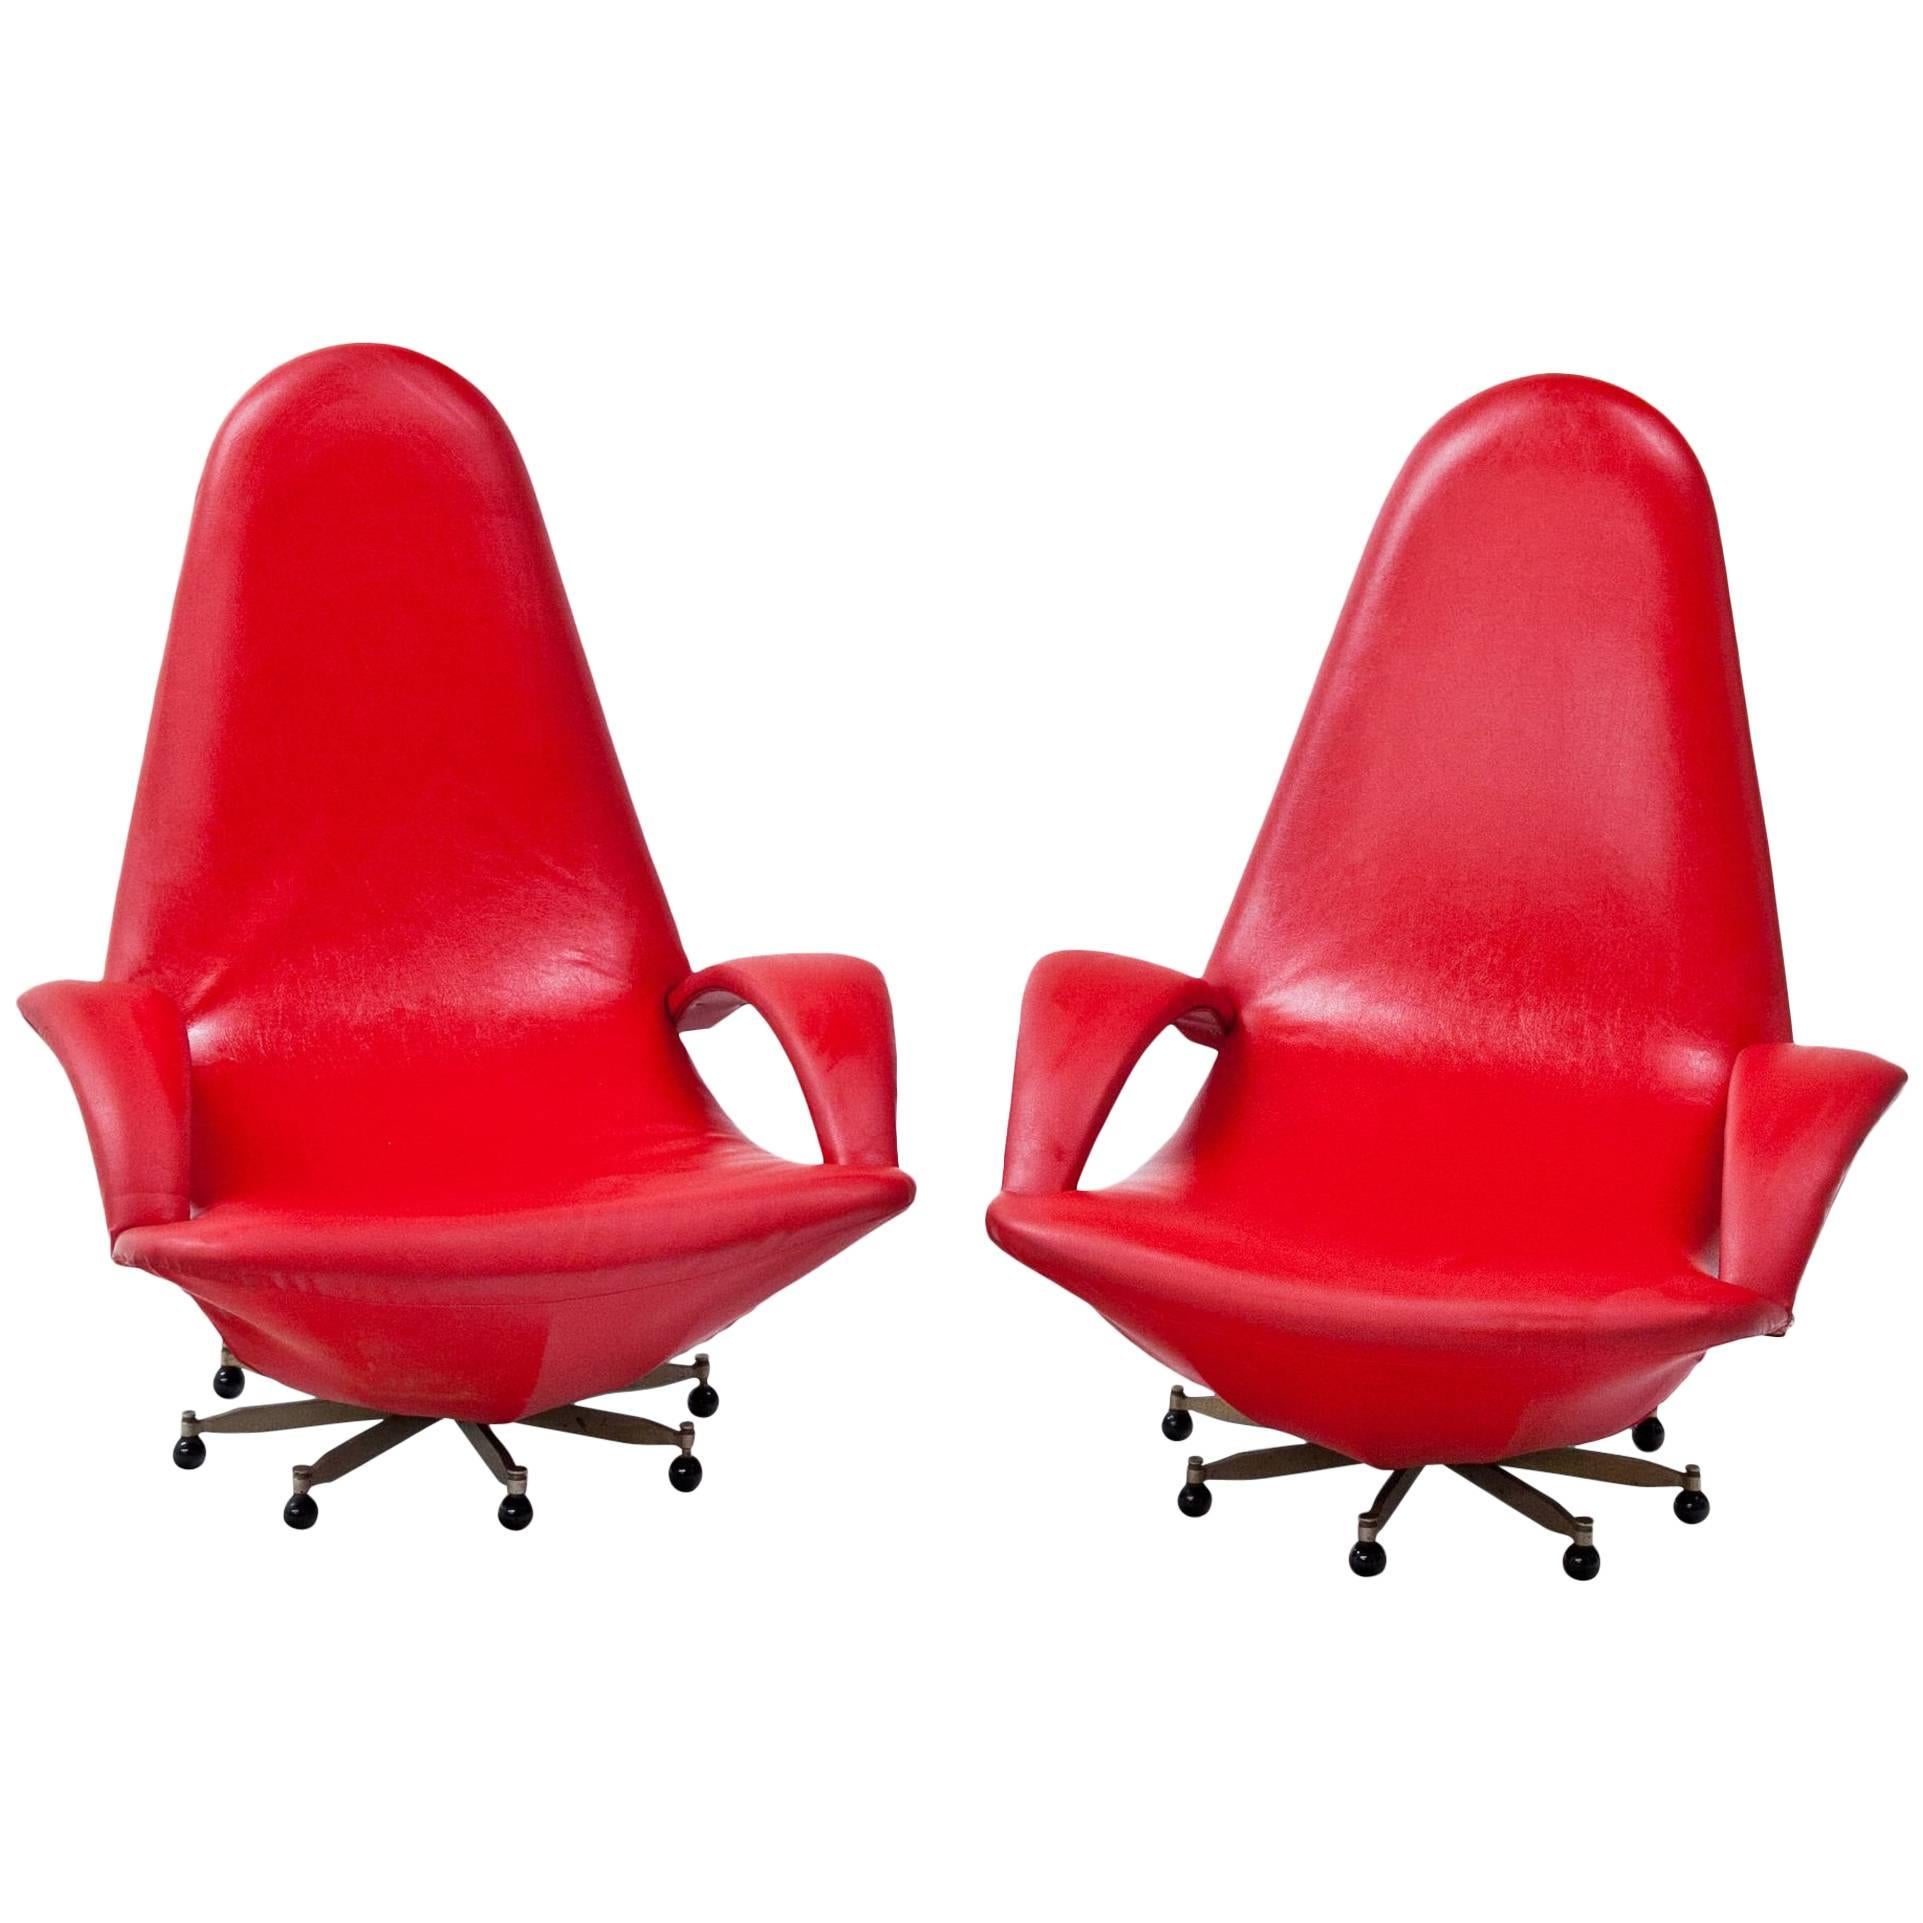 Lounge Chairs, Mid-20th Century